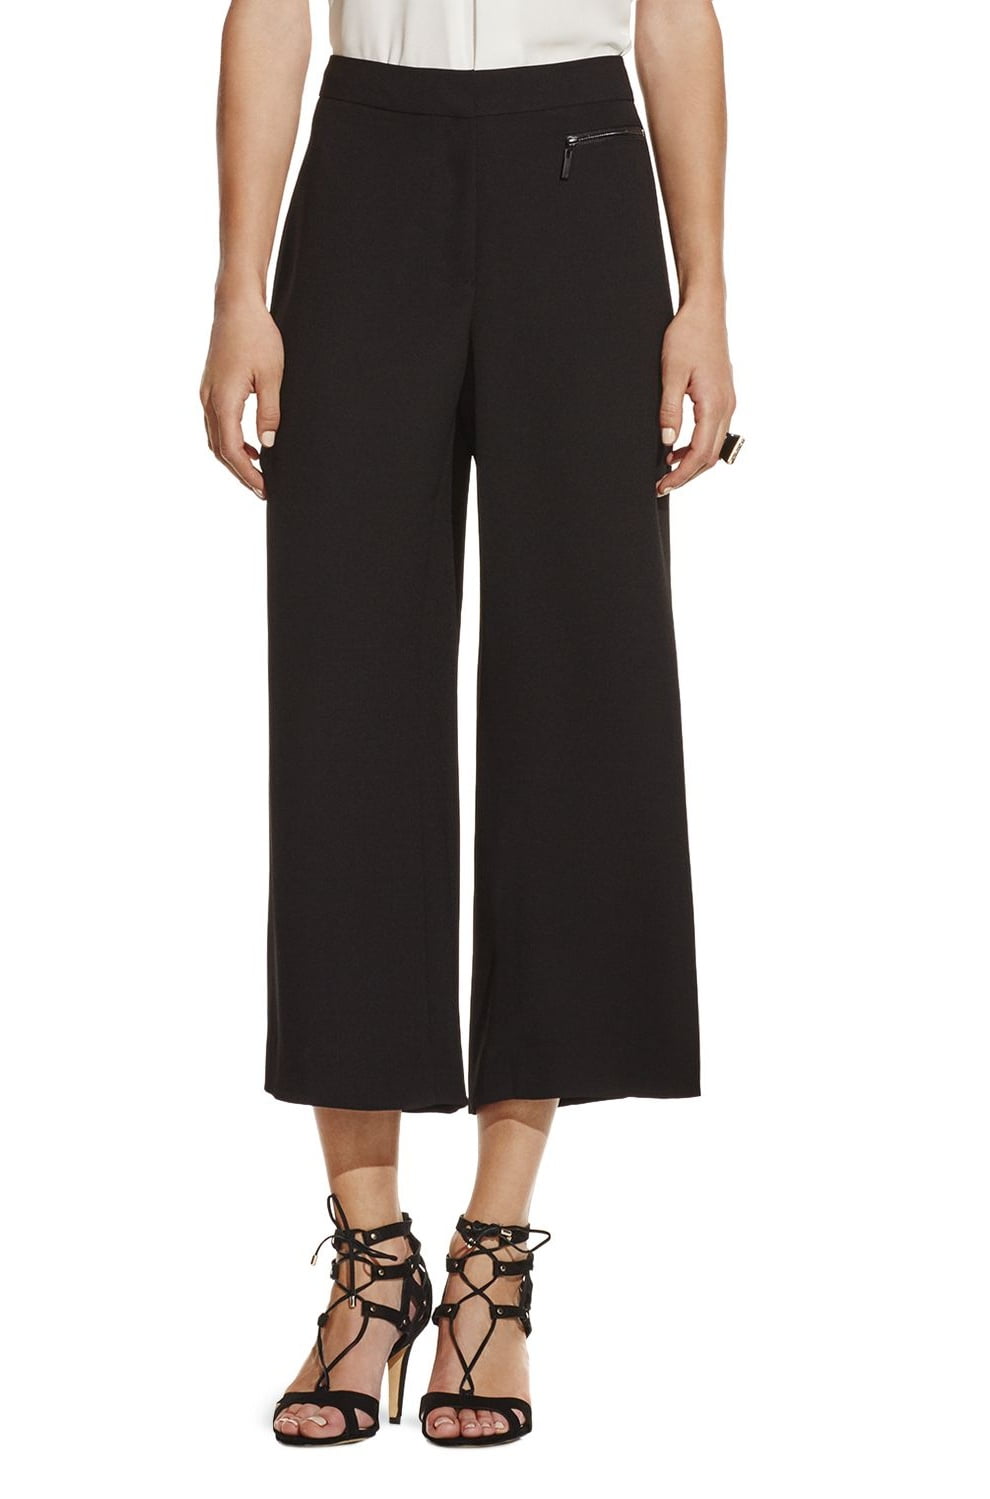 Vince Camuto NEW Black Womens Size 2 Capris Cropped Zipped Pocket Pants ...